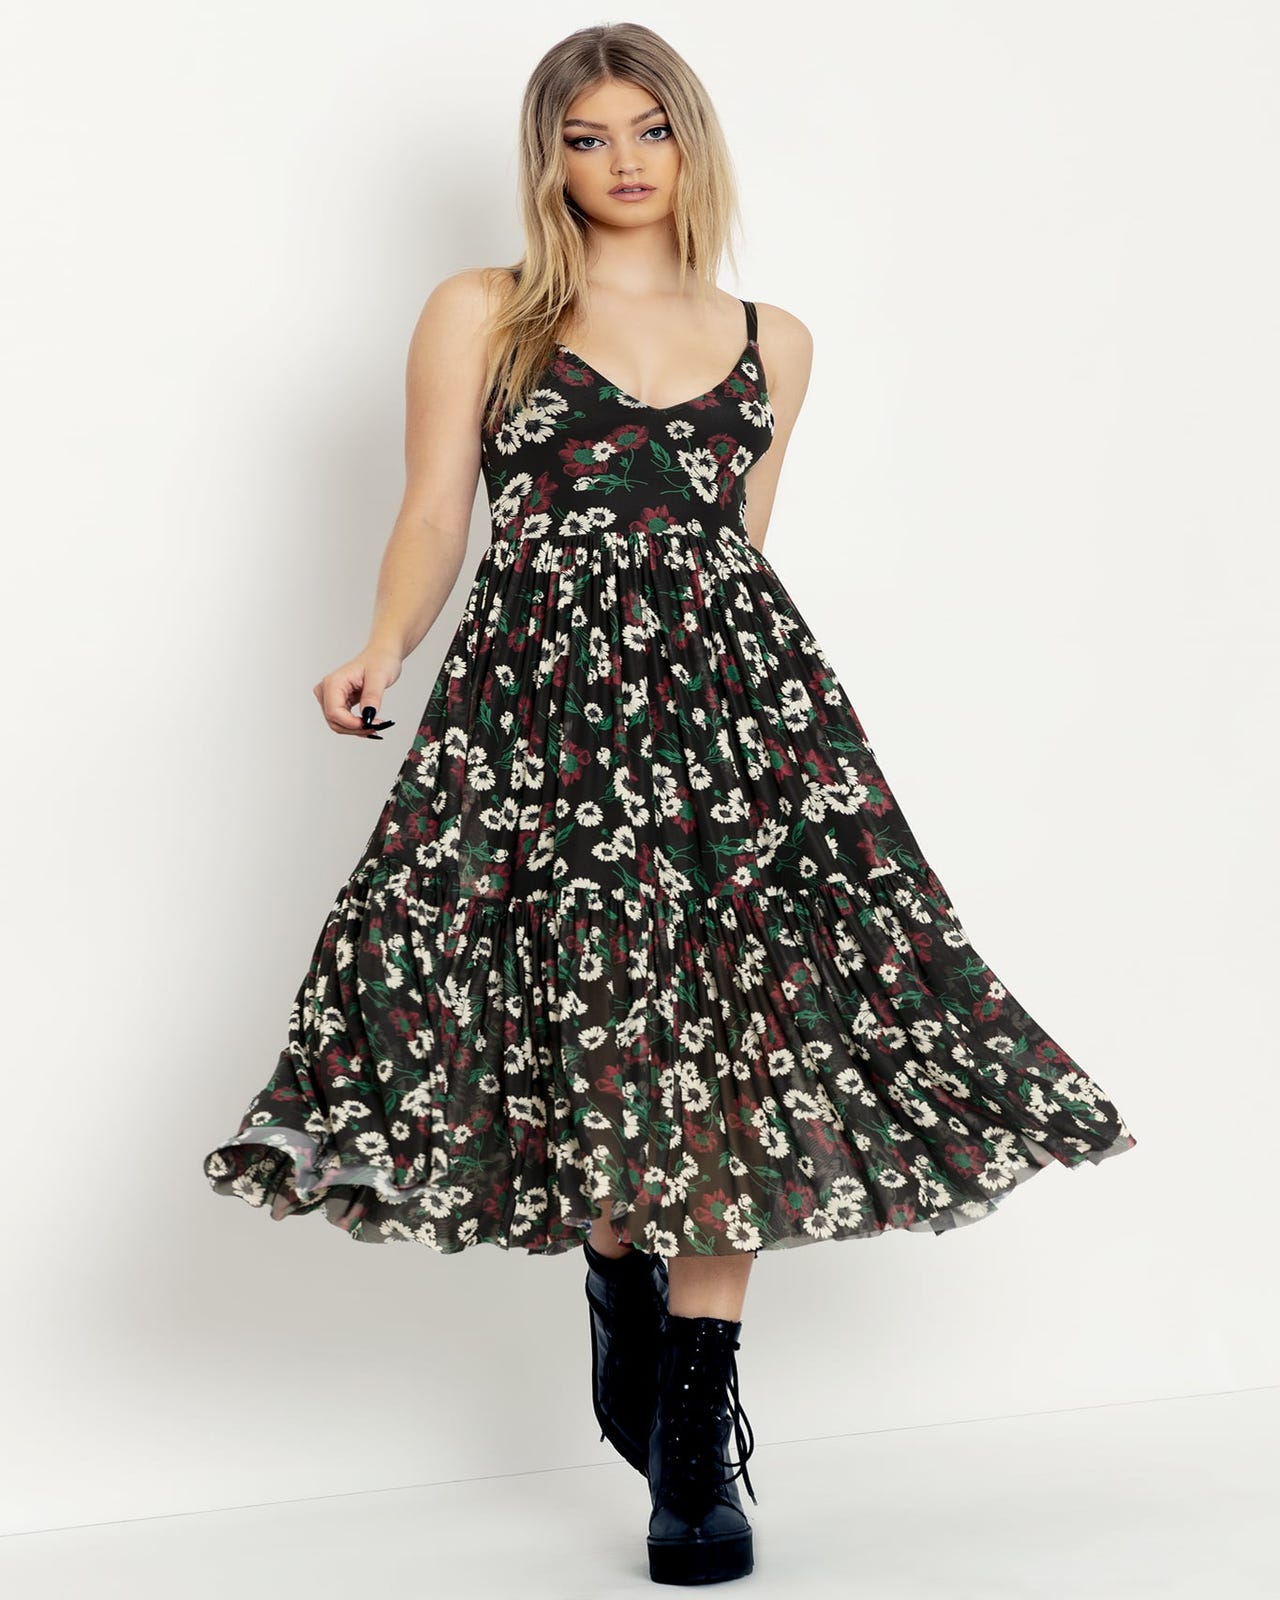 Pretty Weeds Sheer Midaxi Dress - Limited